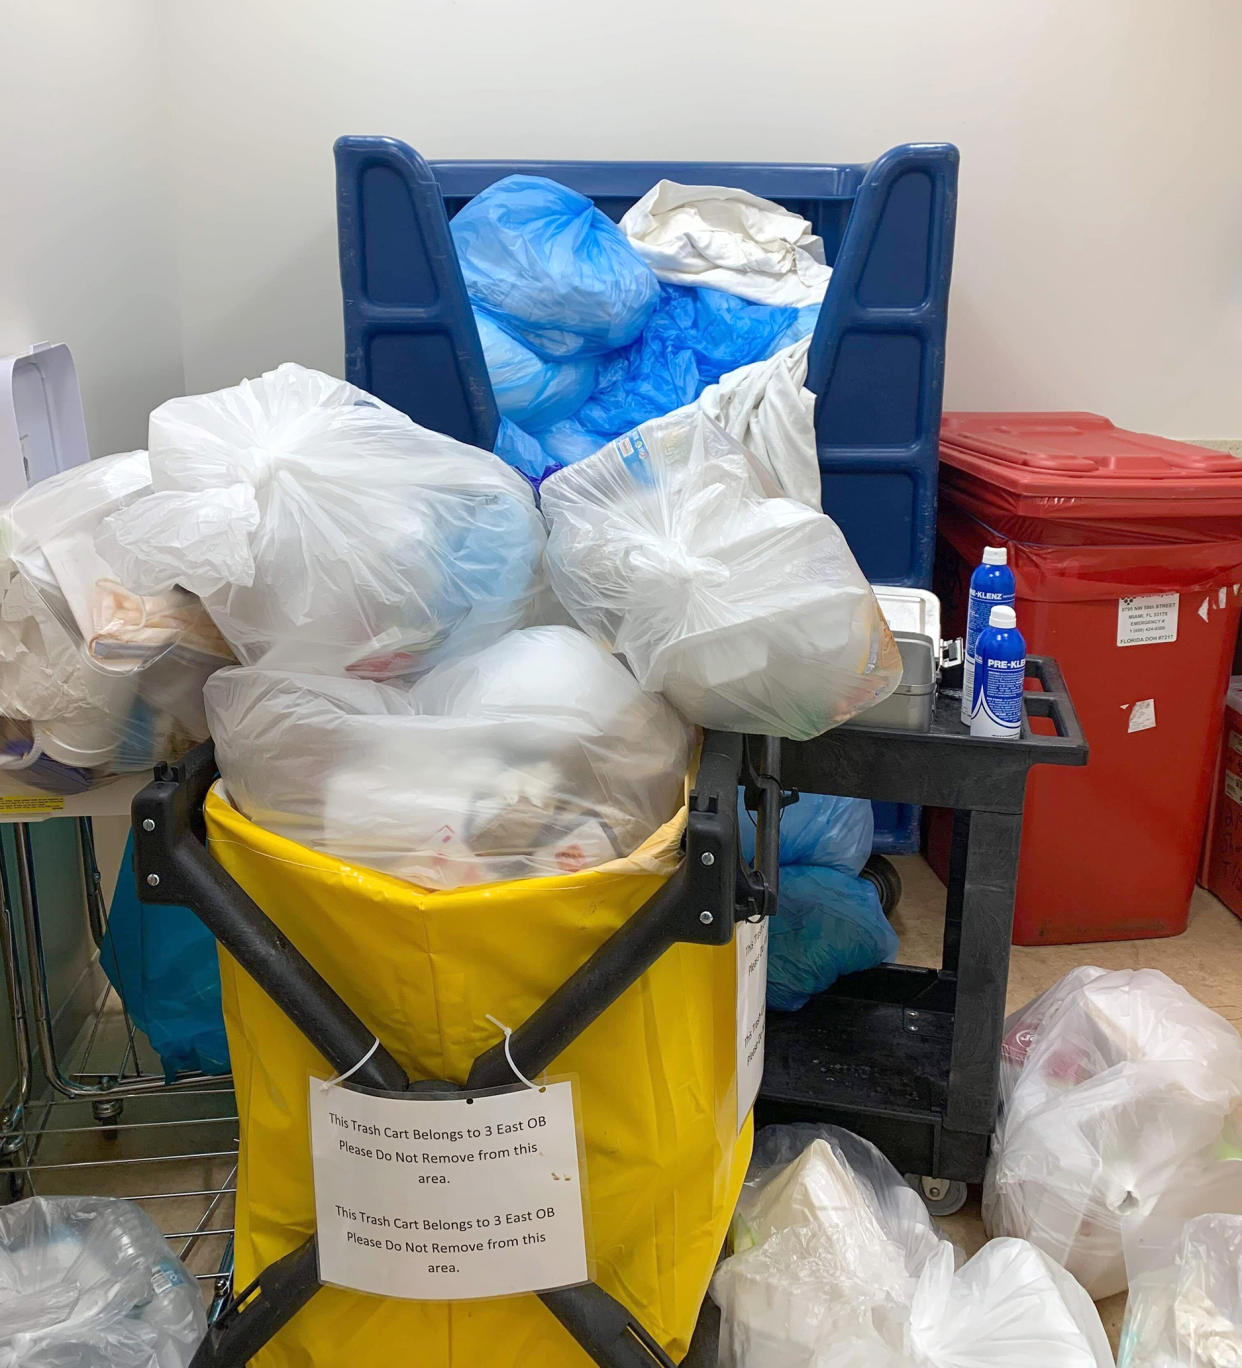 Trash containers overflow with garbage at Health Park Medical Center. (Obtained by NBC News)